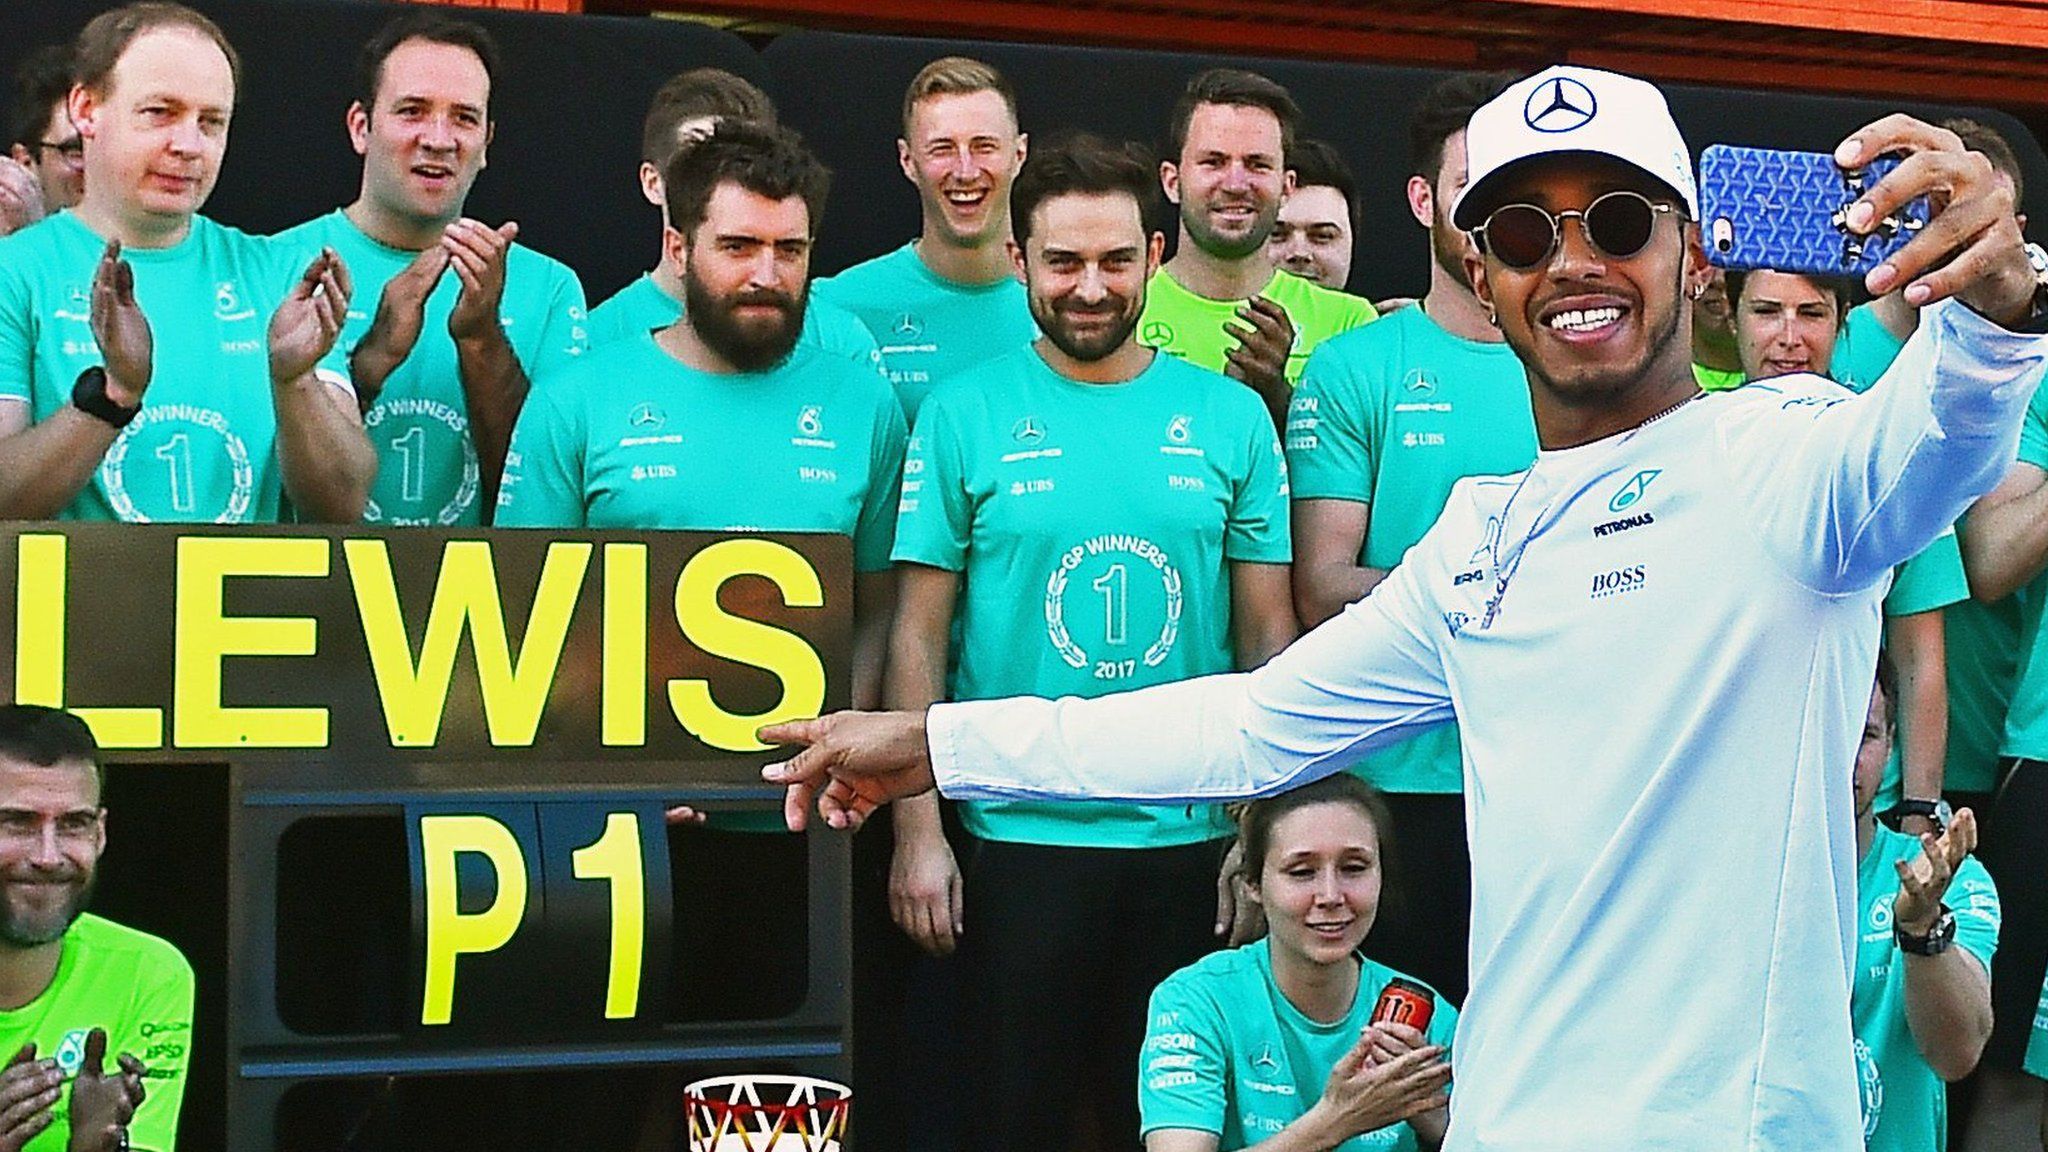 Lewis Hamilton celebrates with his team after the race